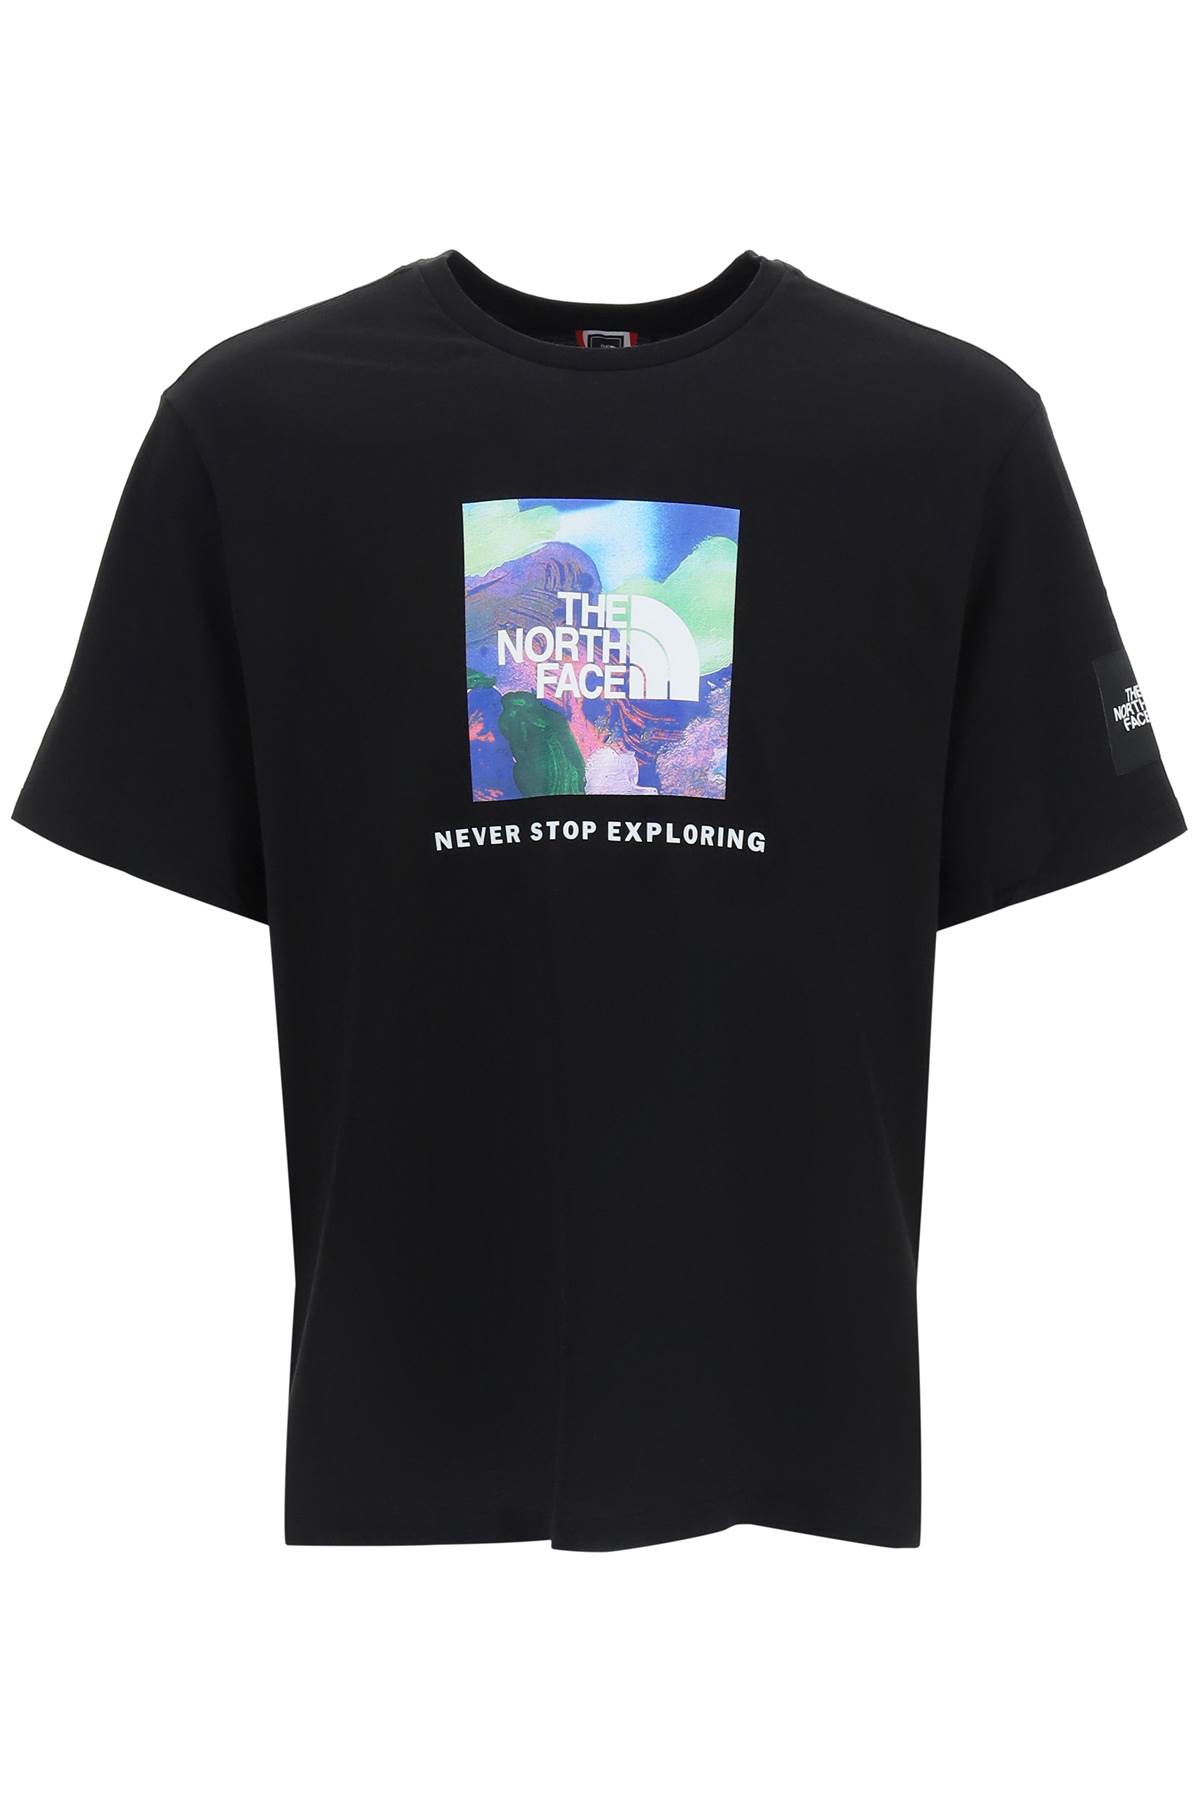 The North Face Graphic Print T-shirt